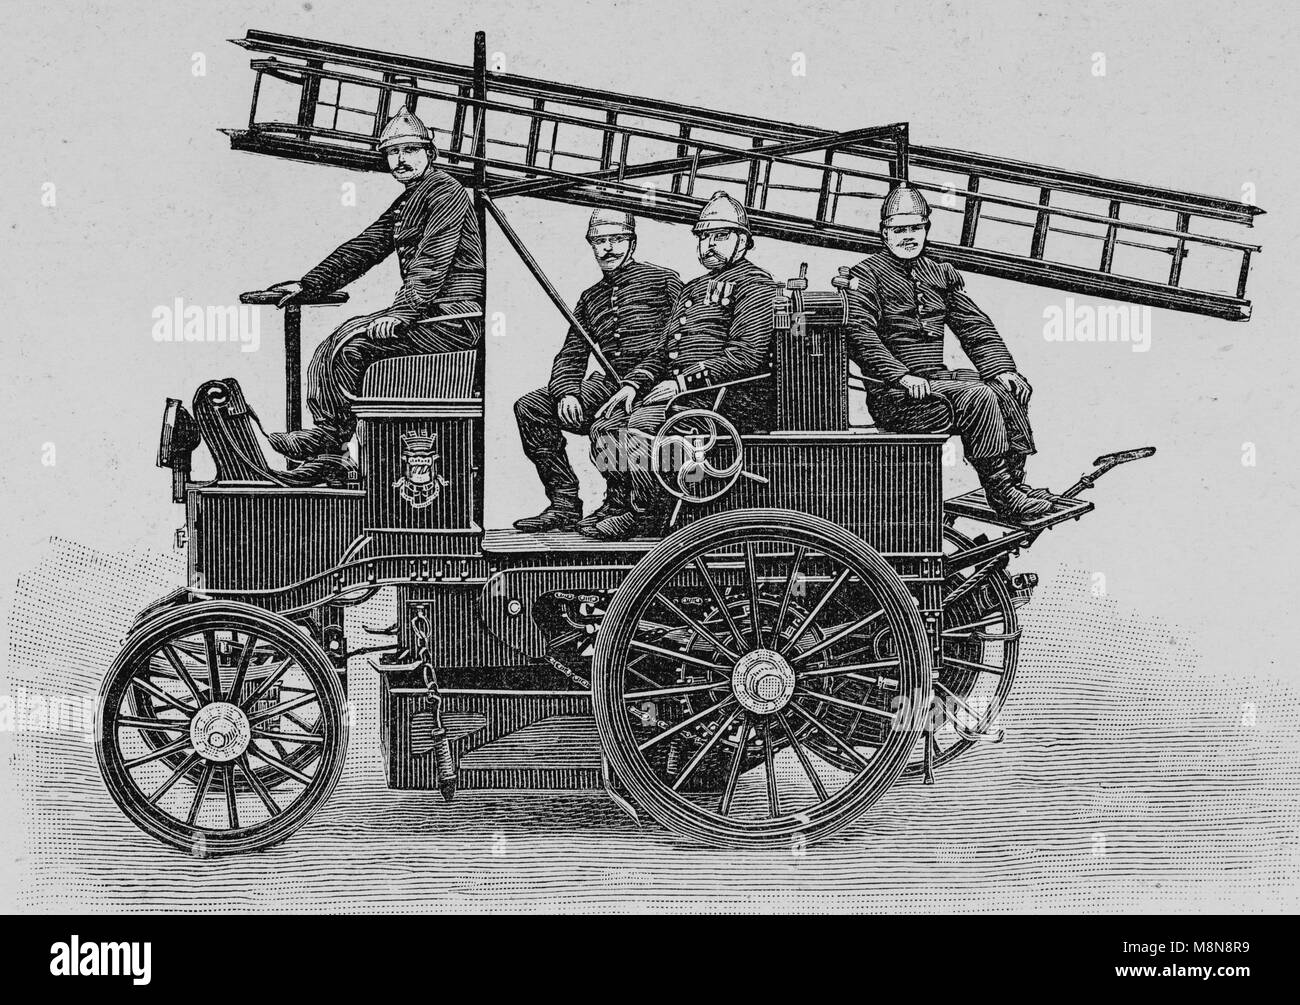 Electric material of the Paris Firemen, Van, Picture from the French weekly newspaper l'Illustration, 25th July 1900 Stock Photo